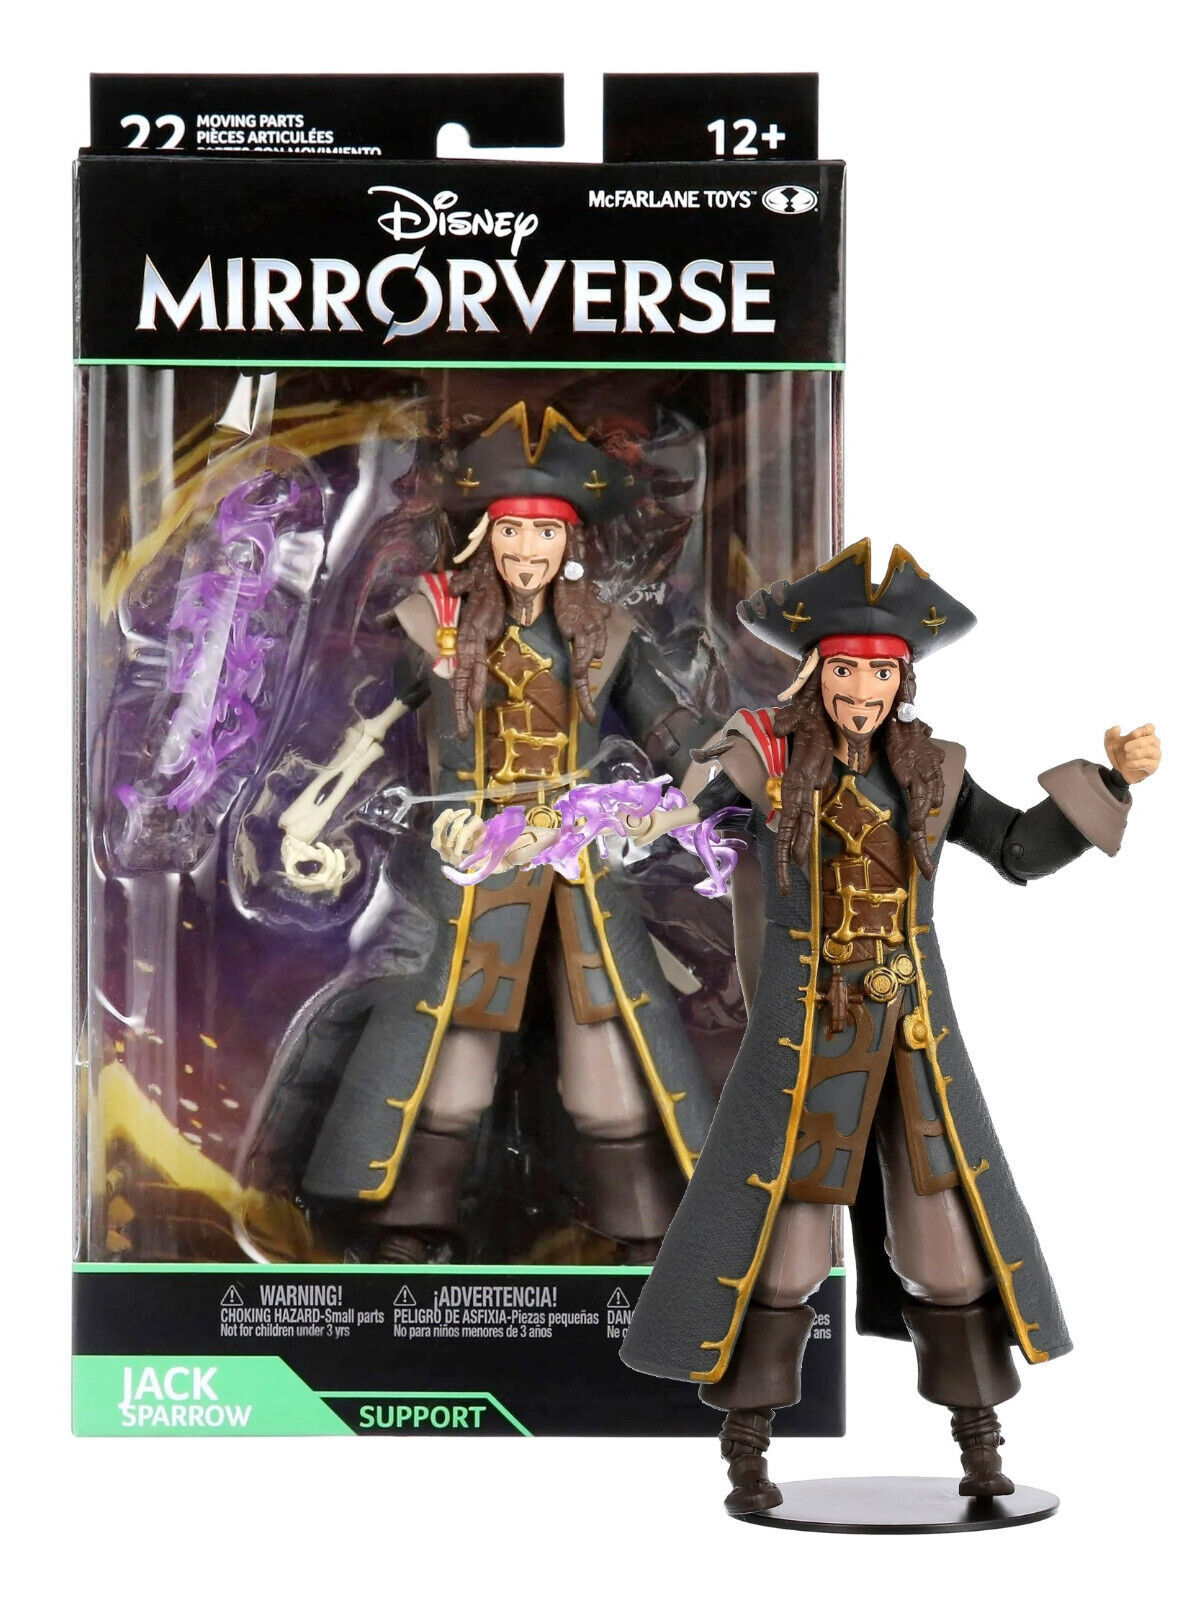 Disney Mirrorverse Jack Sparrow Figure 7" Poseable Figure with Stand New in Box - $10.88